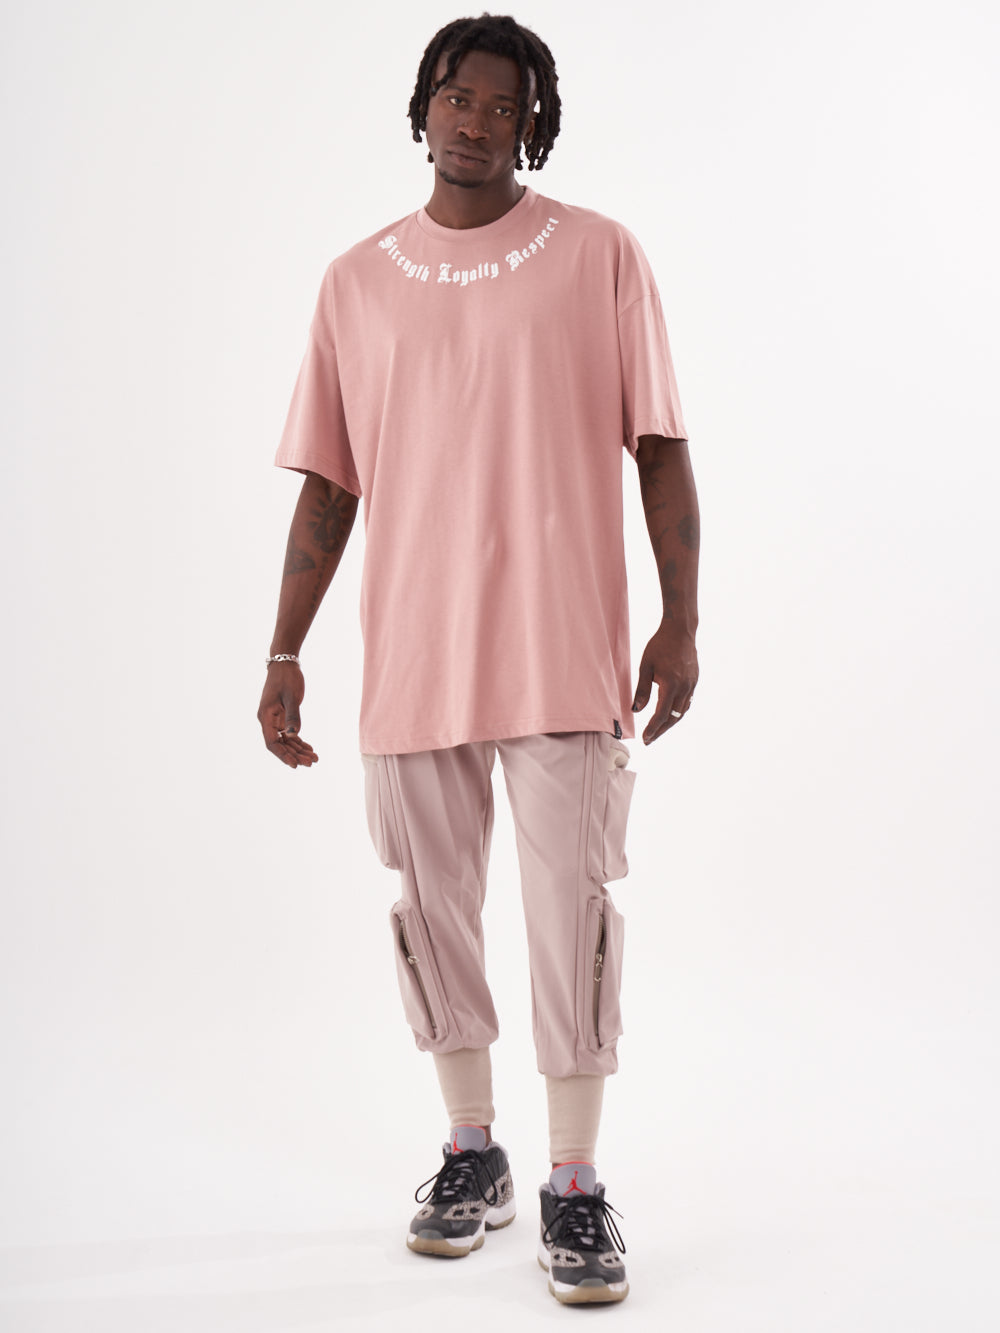 A man wearing a pink CREED T-SHIRT and cargo pants.